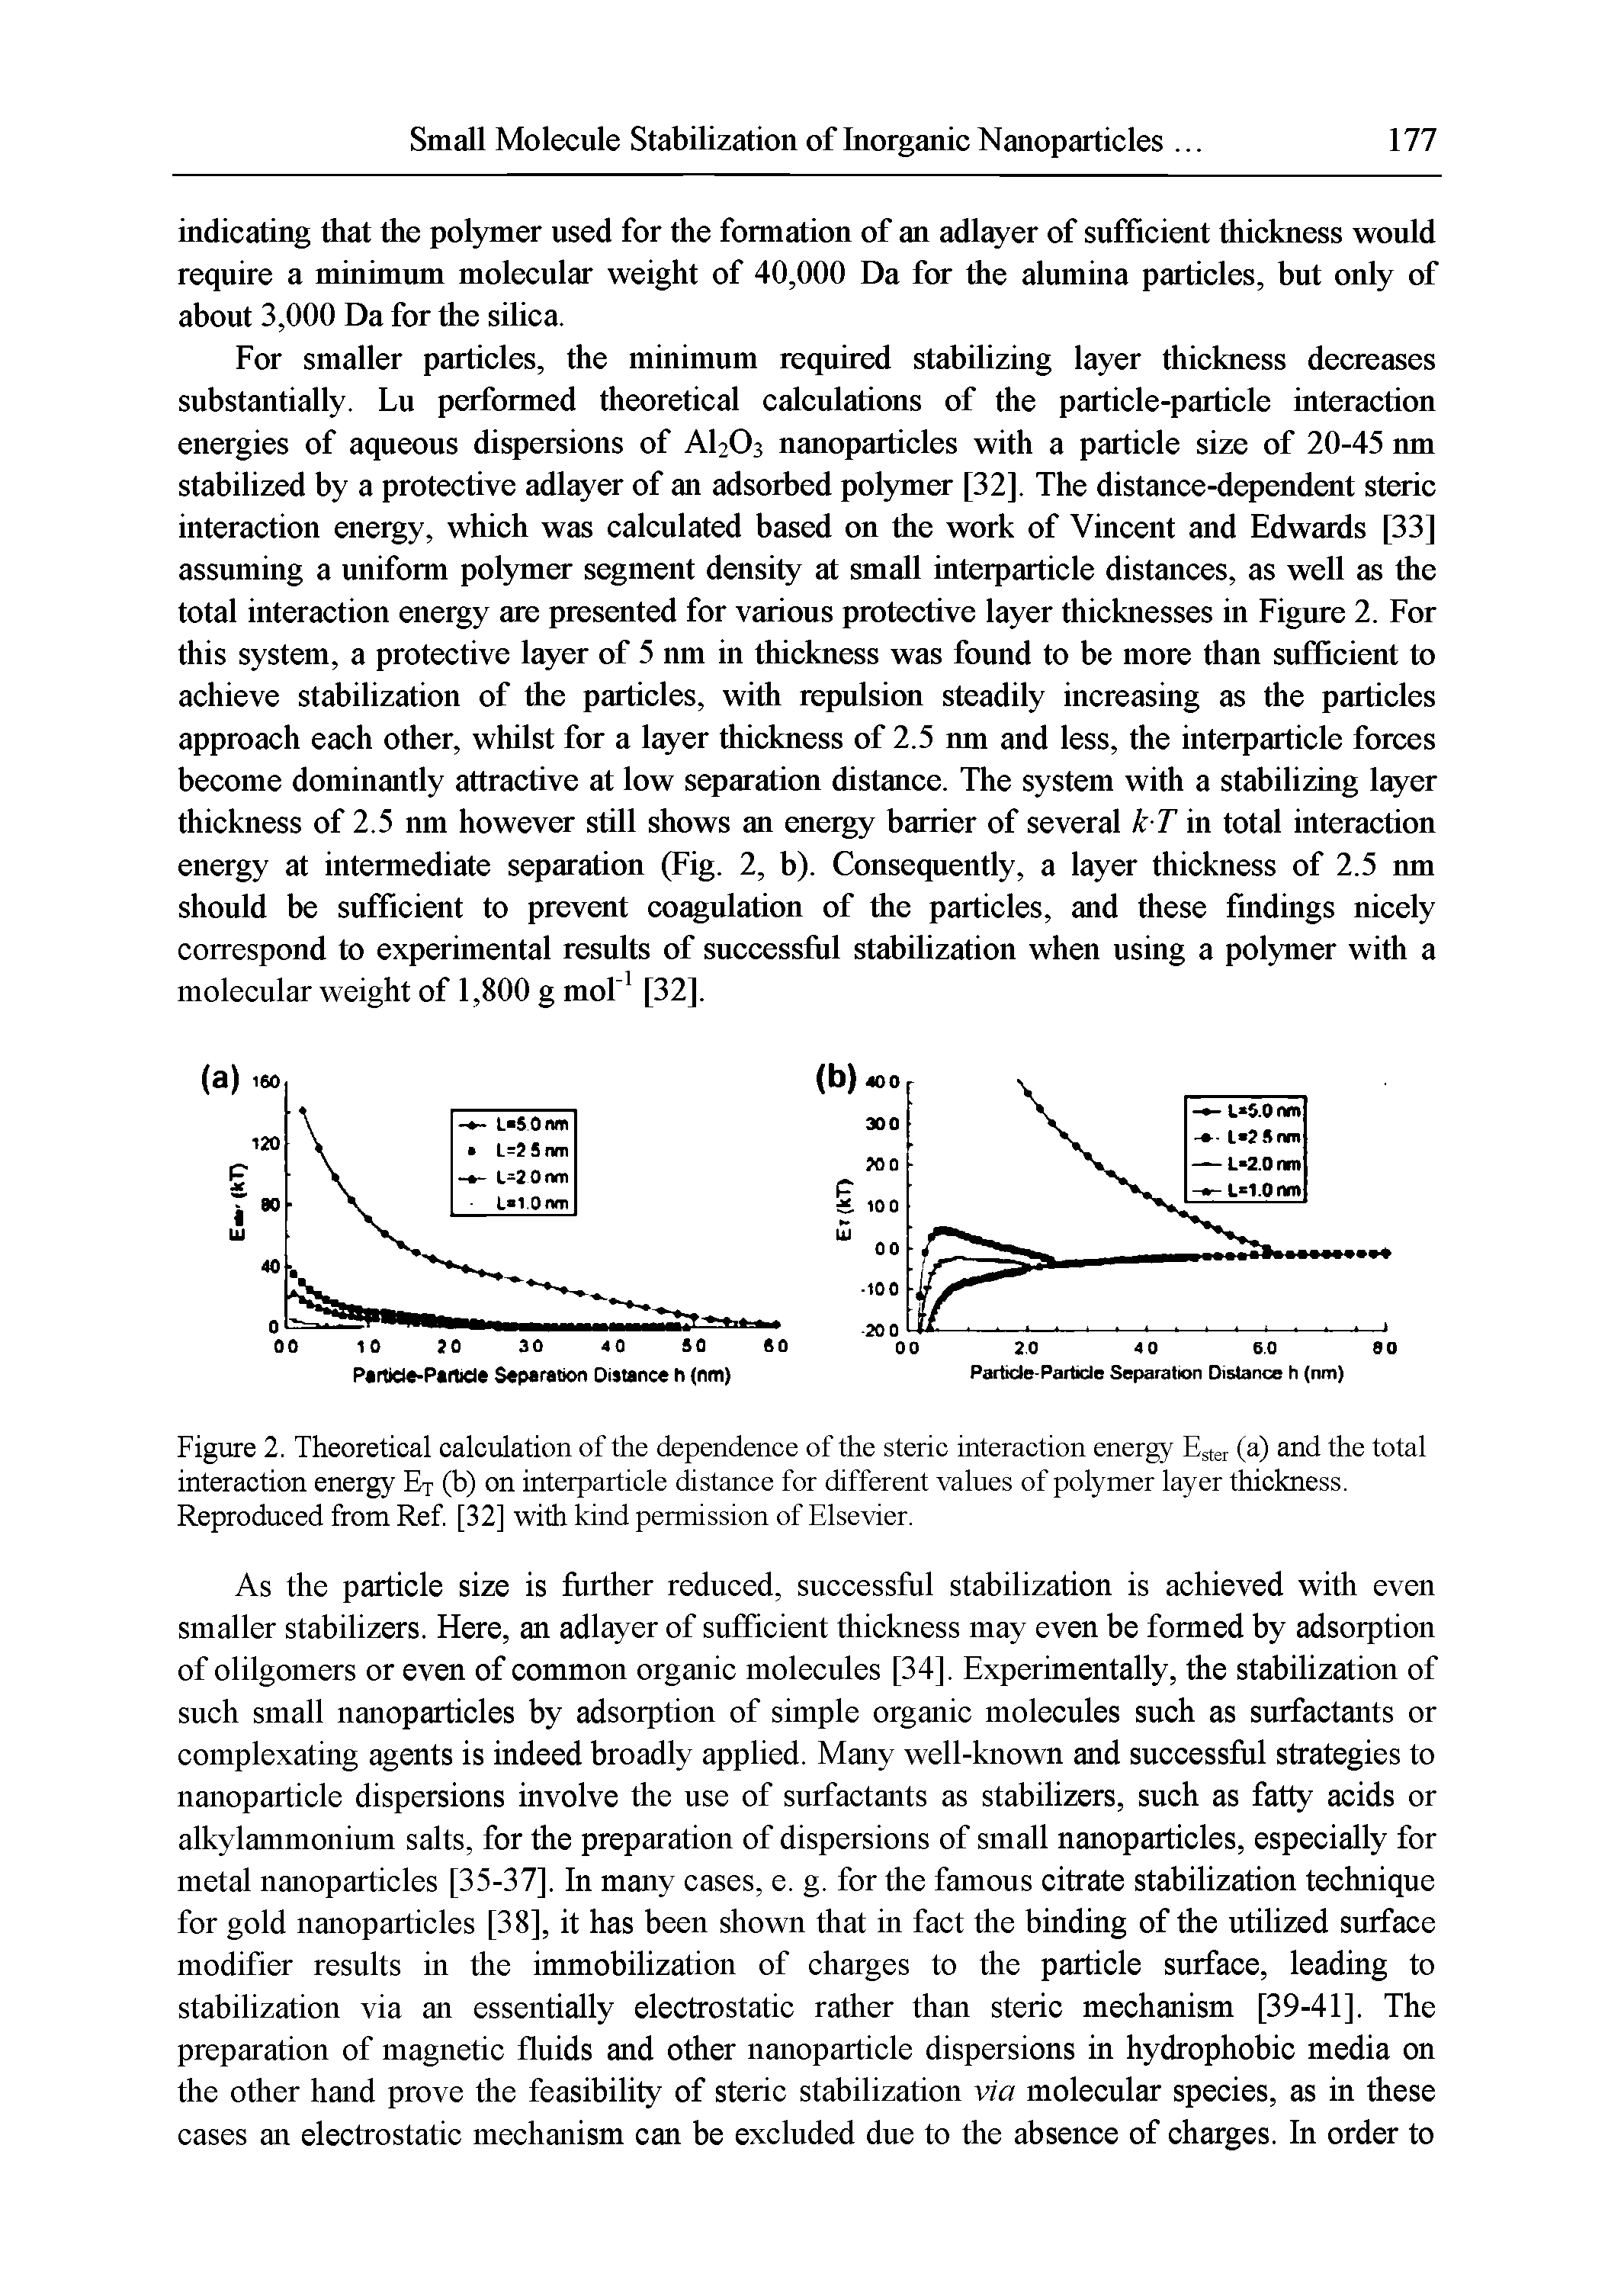 Figure 2. Theoretical calculation of the dependence of the steric interaction energy Ester (a) and the total interaction energy Et (b) on interparticle distance for different values of polymer layer thickness. Reproduced from Ref [32] with kind permission of Elsevier.